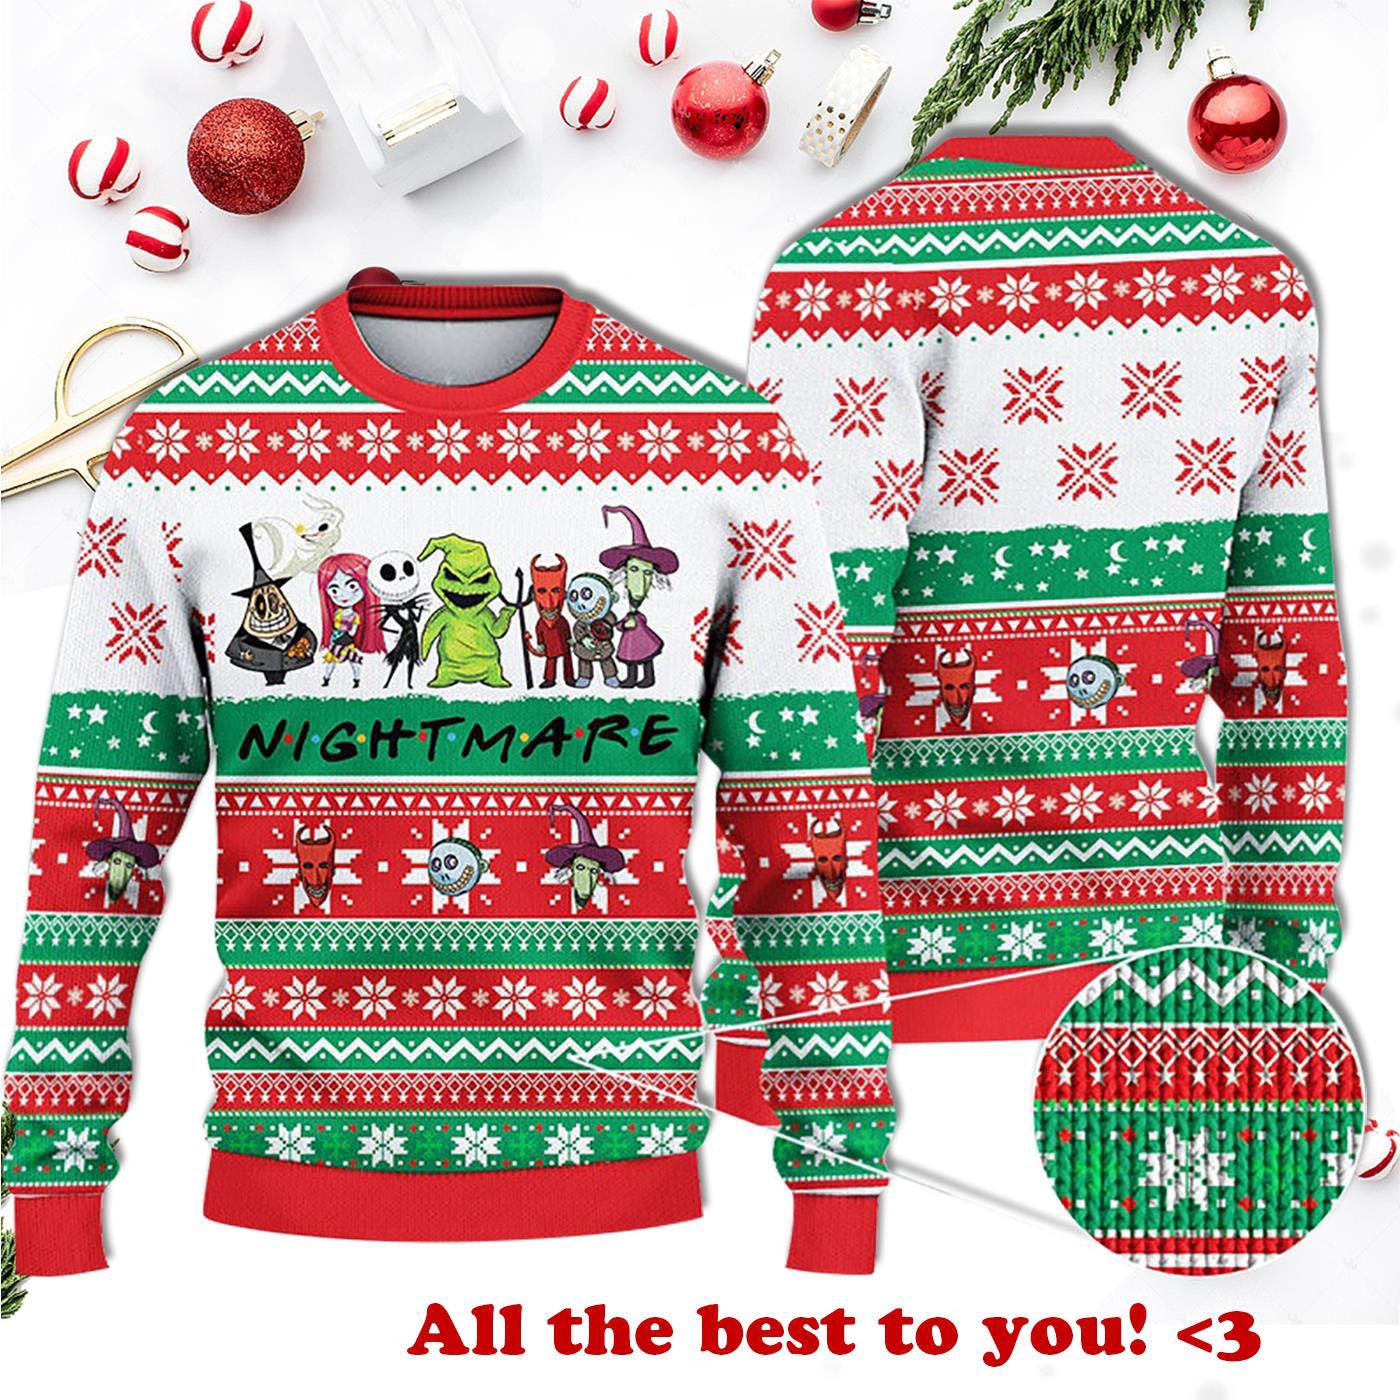 Discover Nightmare Christmas Ugly Christmas Knitted Sweater, Christmas Ugly Sweater